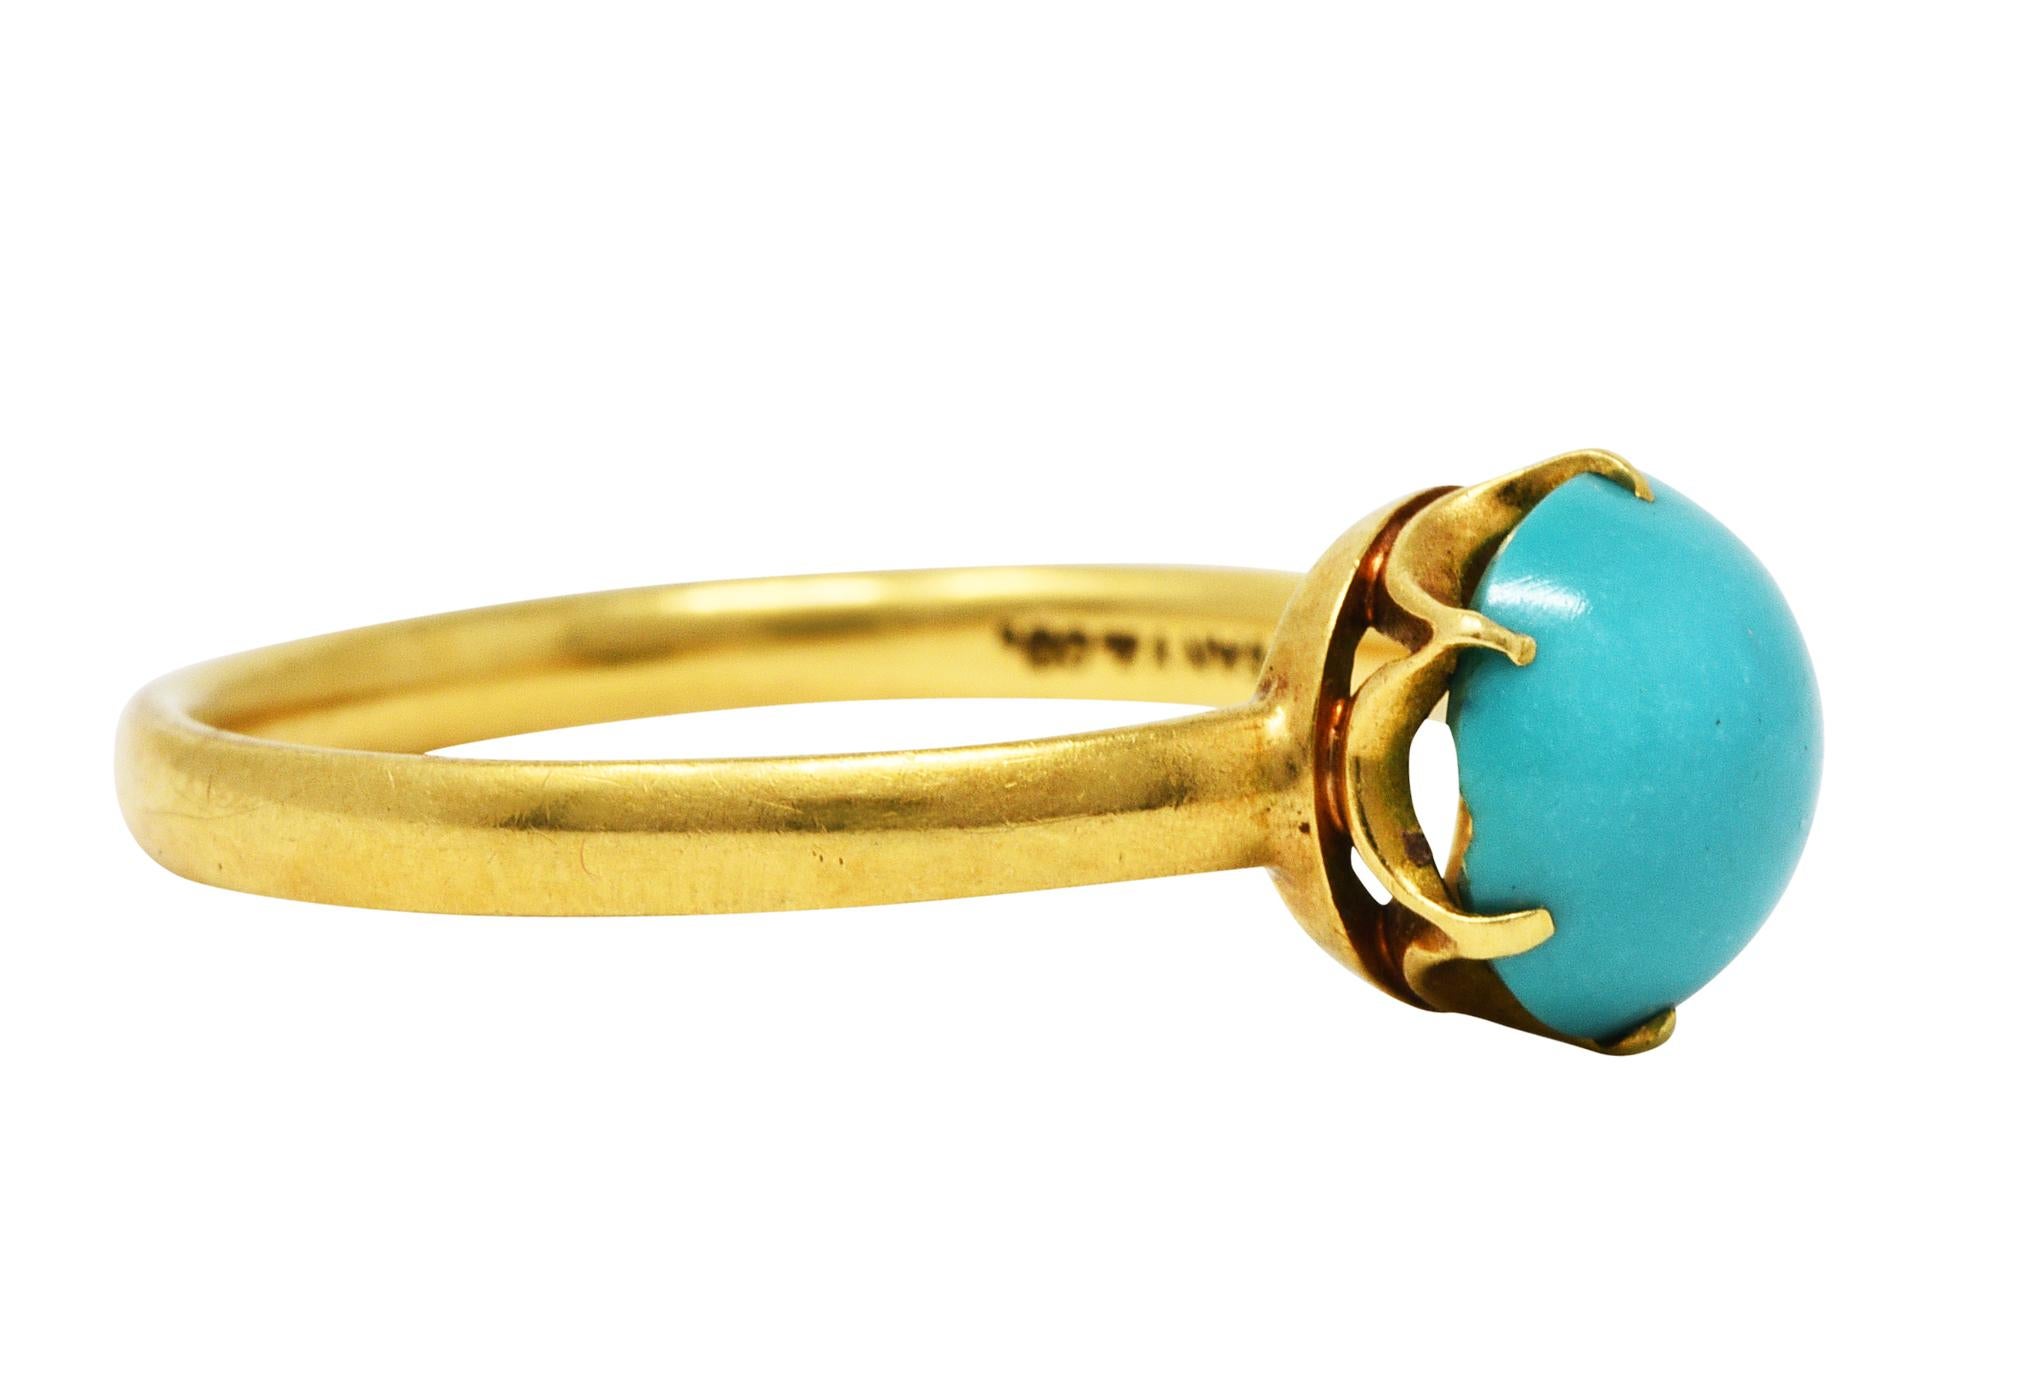 Gemstone ring centers a 7.3 mm round turquoise cabochon

Opaque with uniform greenish blue color and no face-up matrix - signed by cutter

Talon set in a stylized belcher head

Tested as 18 karat gold

Fully signed Tiffany & Co.

Circa: 1960s

Ring